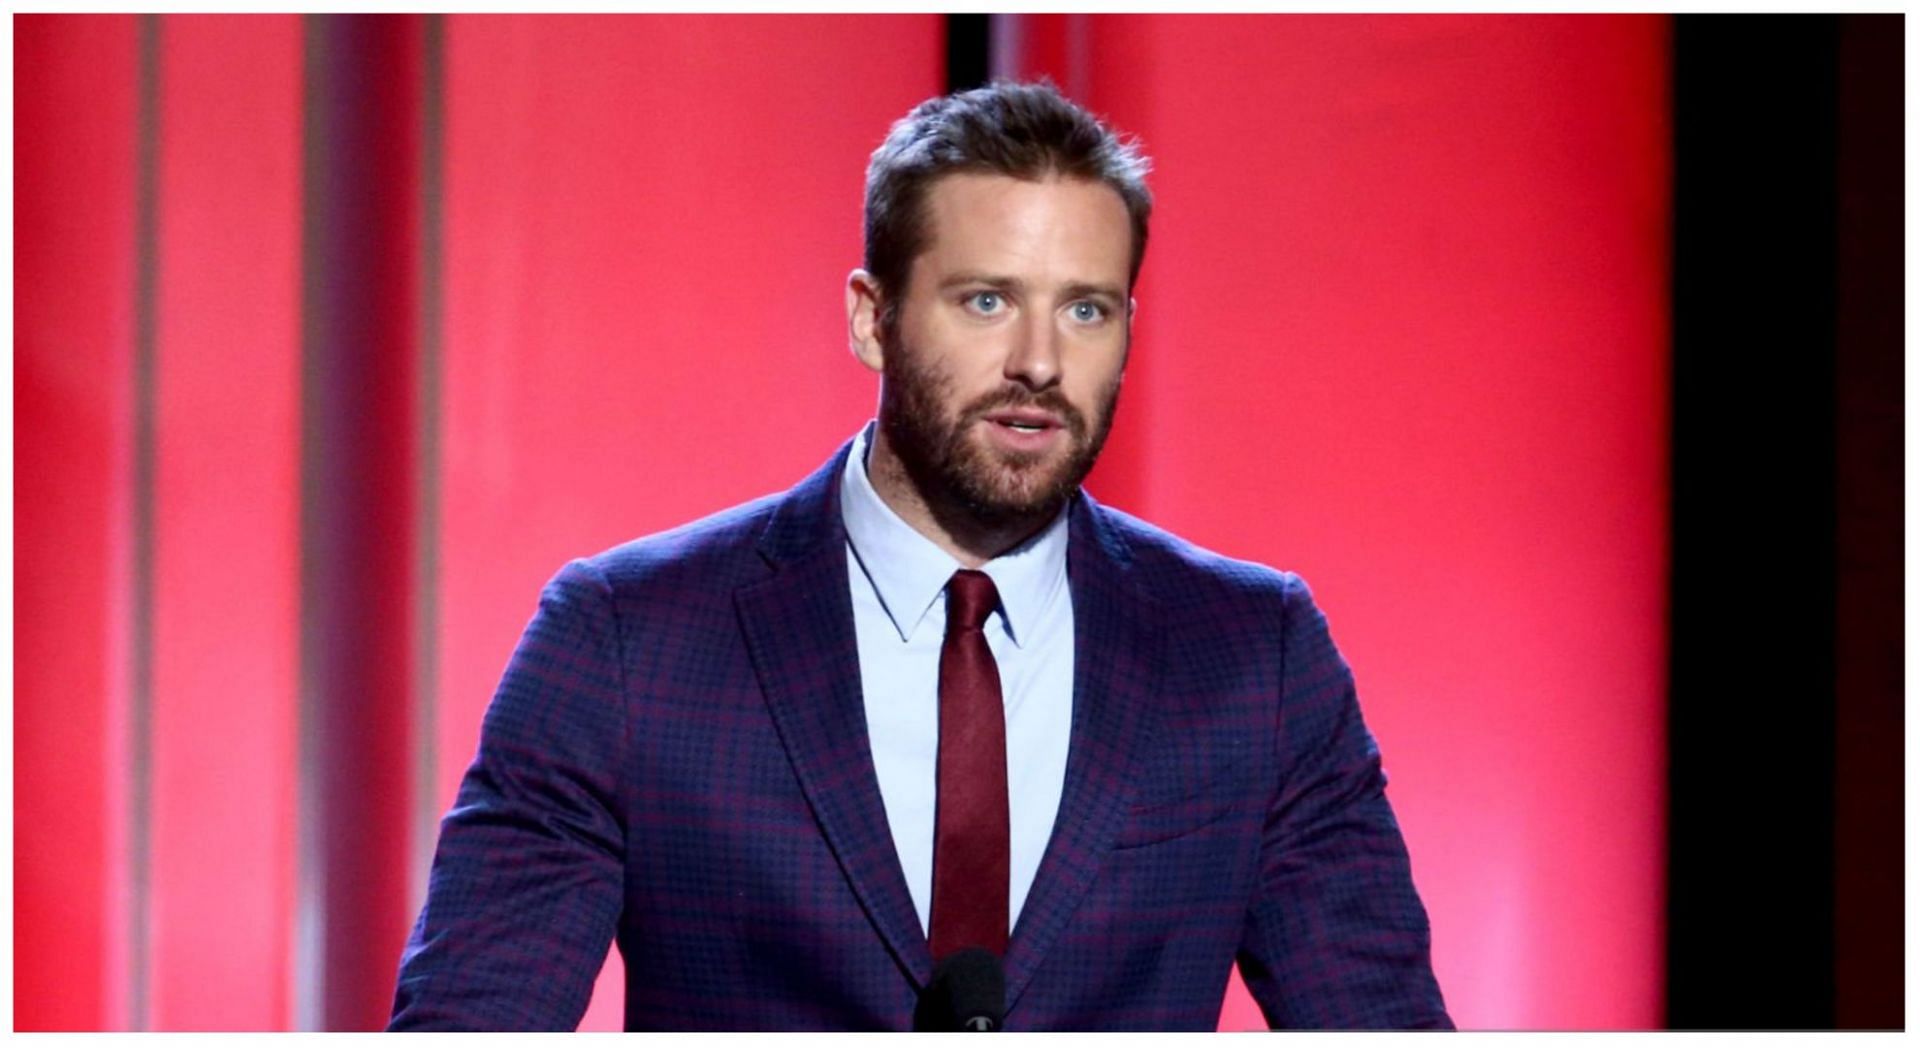 Armie Hammer addressed abuse allegations in new interview (Image via Getty Images)